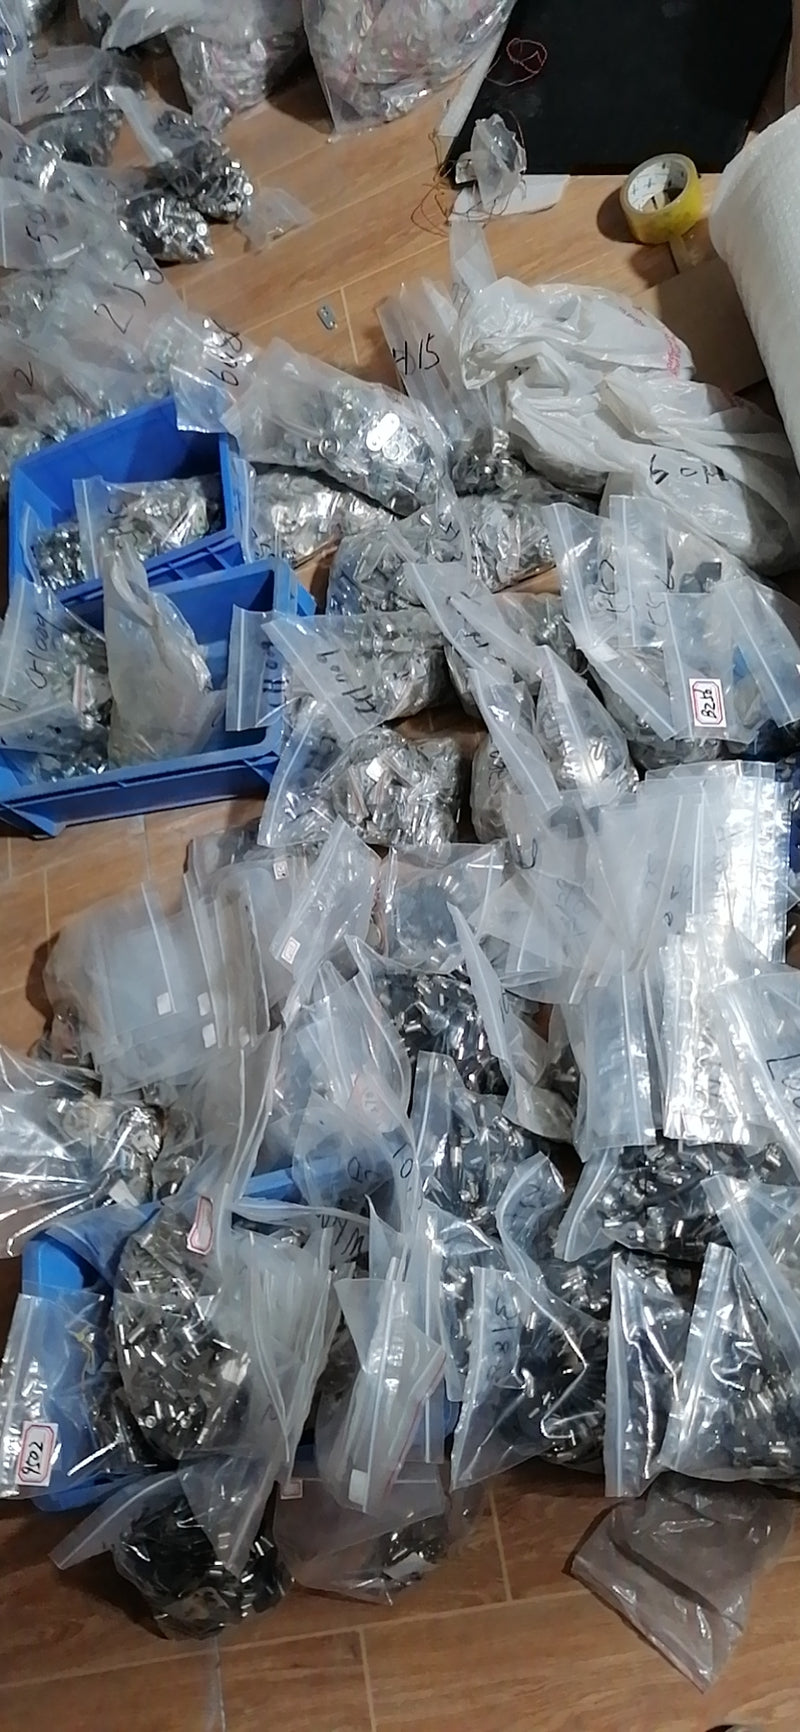 Are you looking for arcade keys and locks? You've found the right place here.We over thousand!!!!